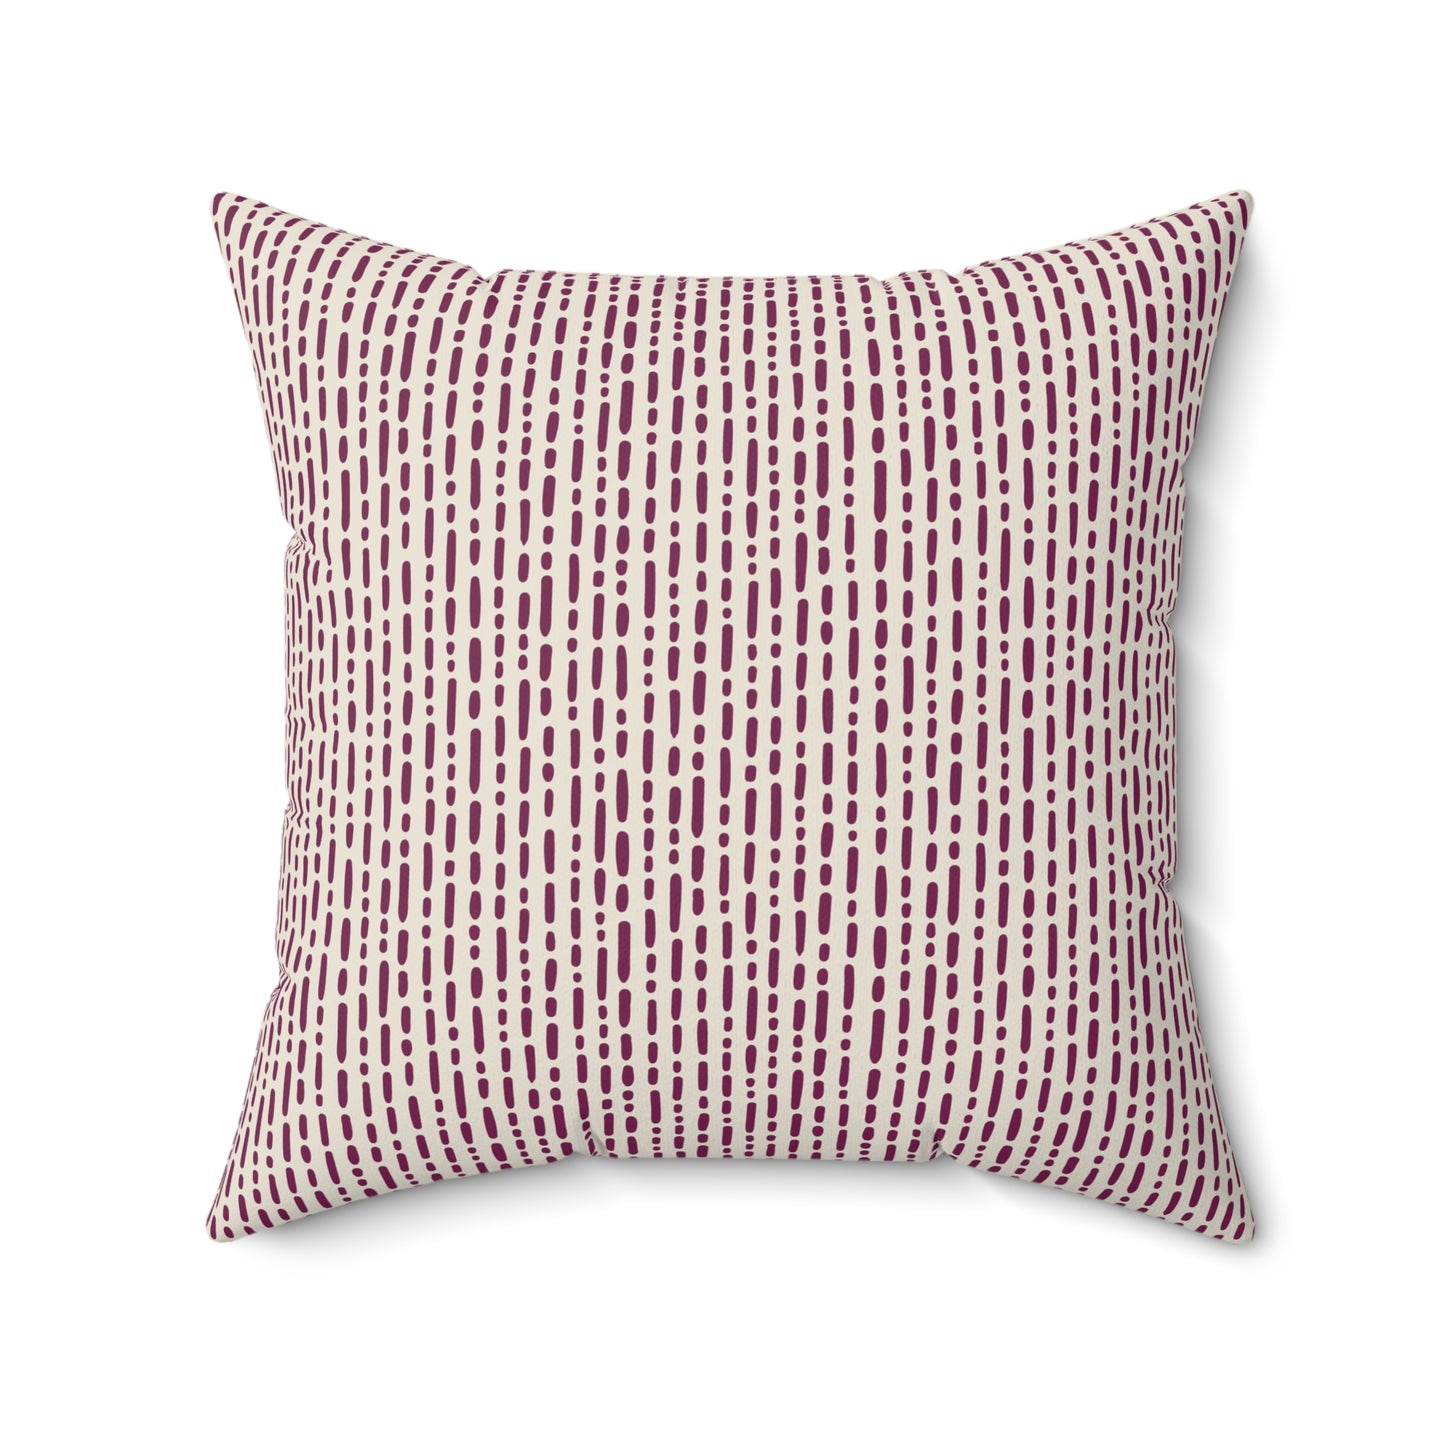 Boho Vibes Pattern 5 - Faux Suede Square Pillow